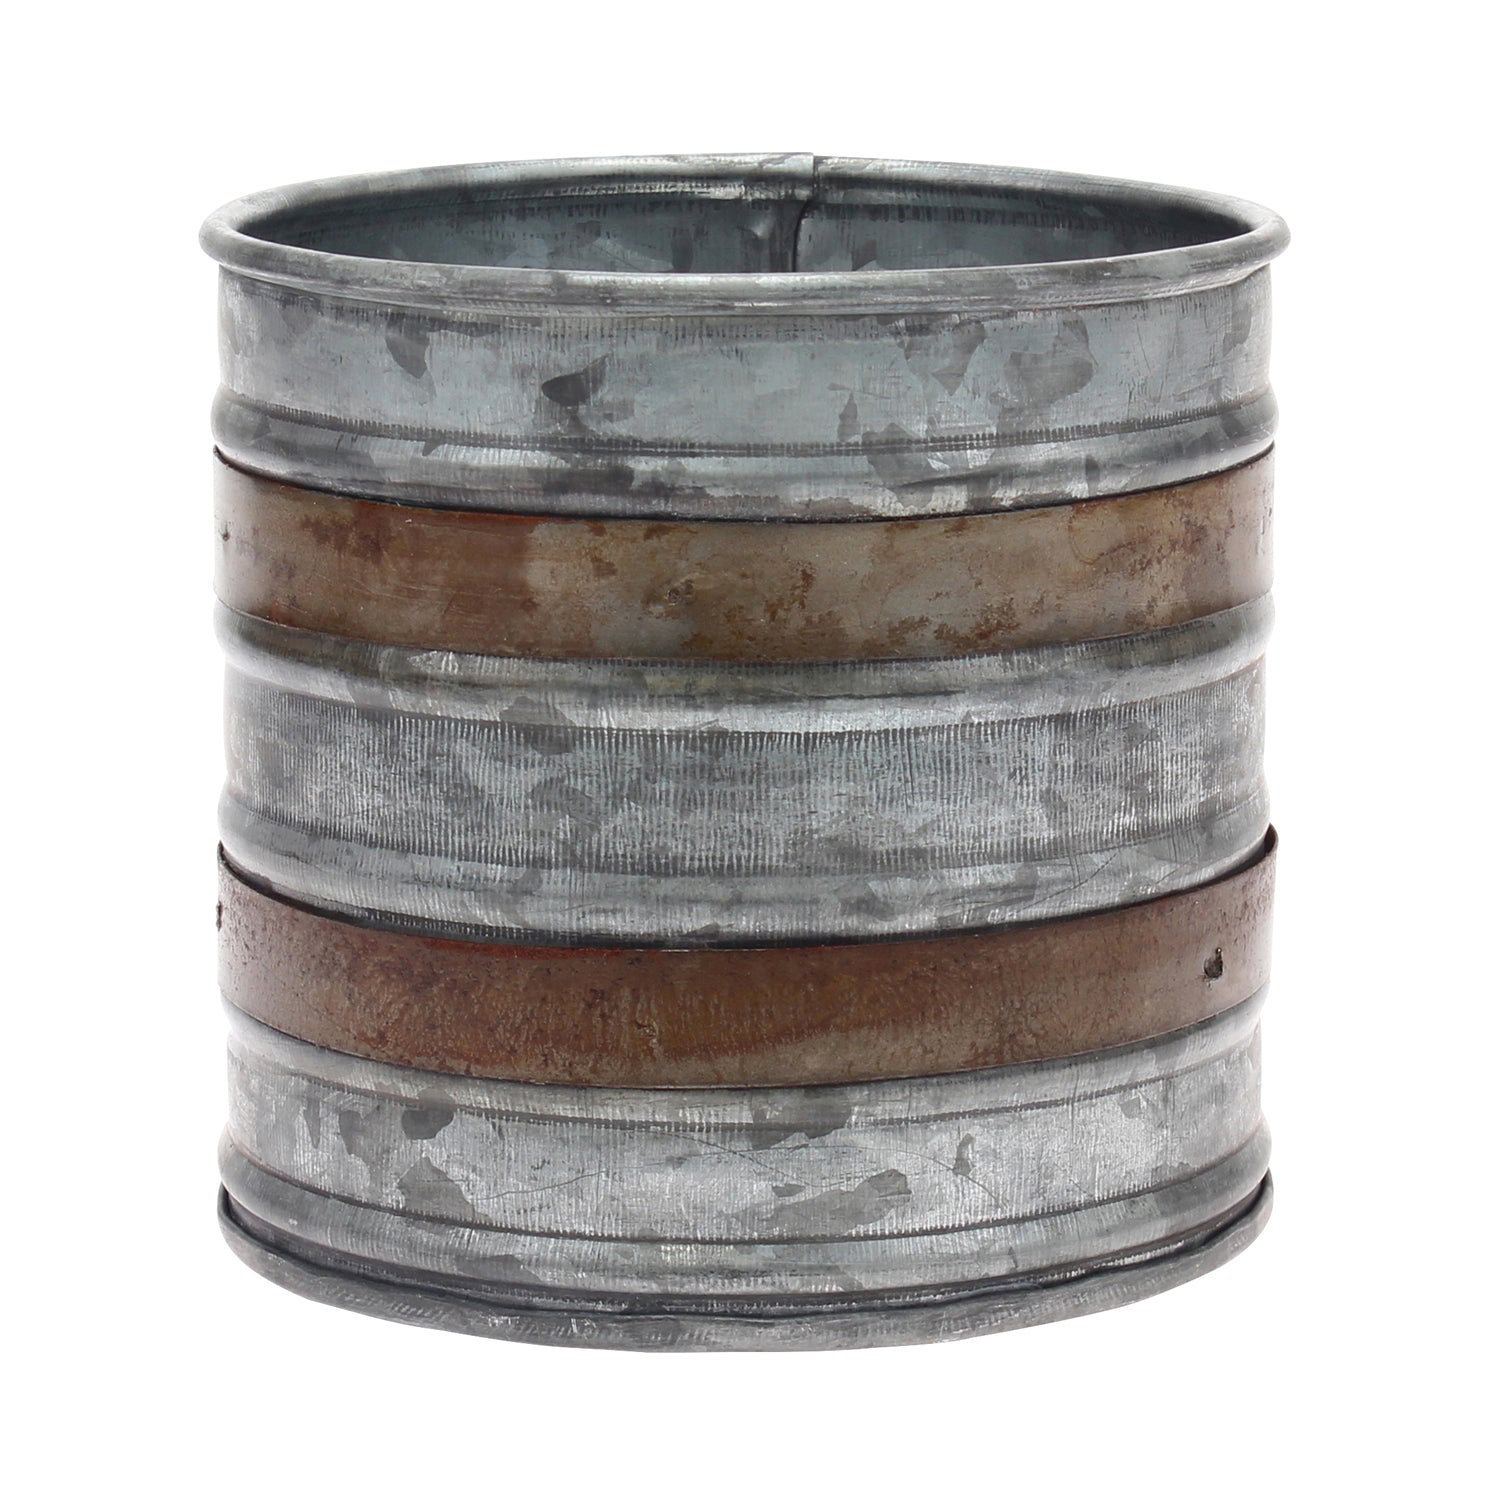 Aged Galvanized Metal Container with Rust Trim Detail